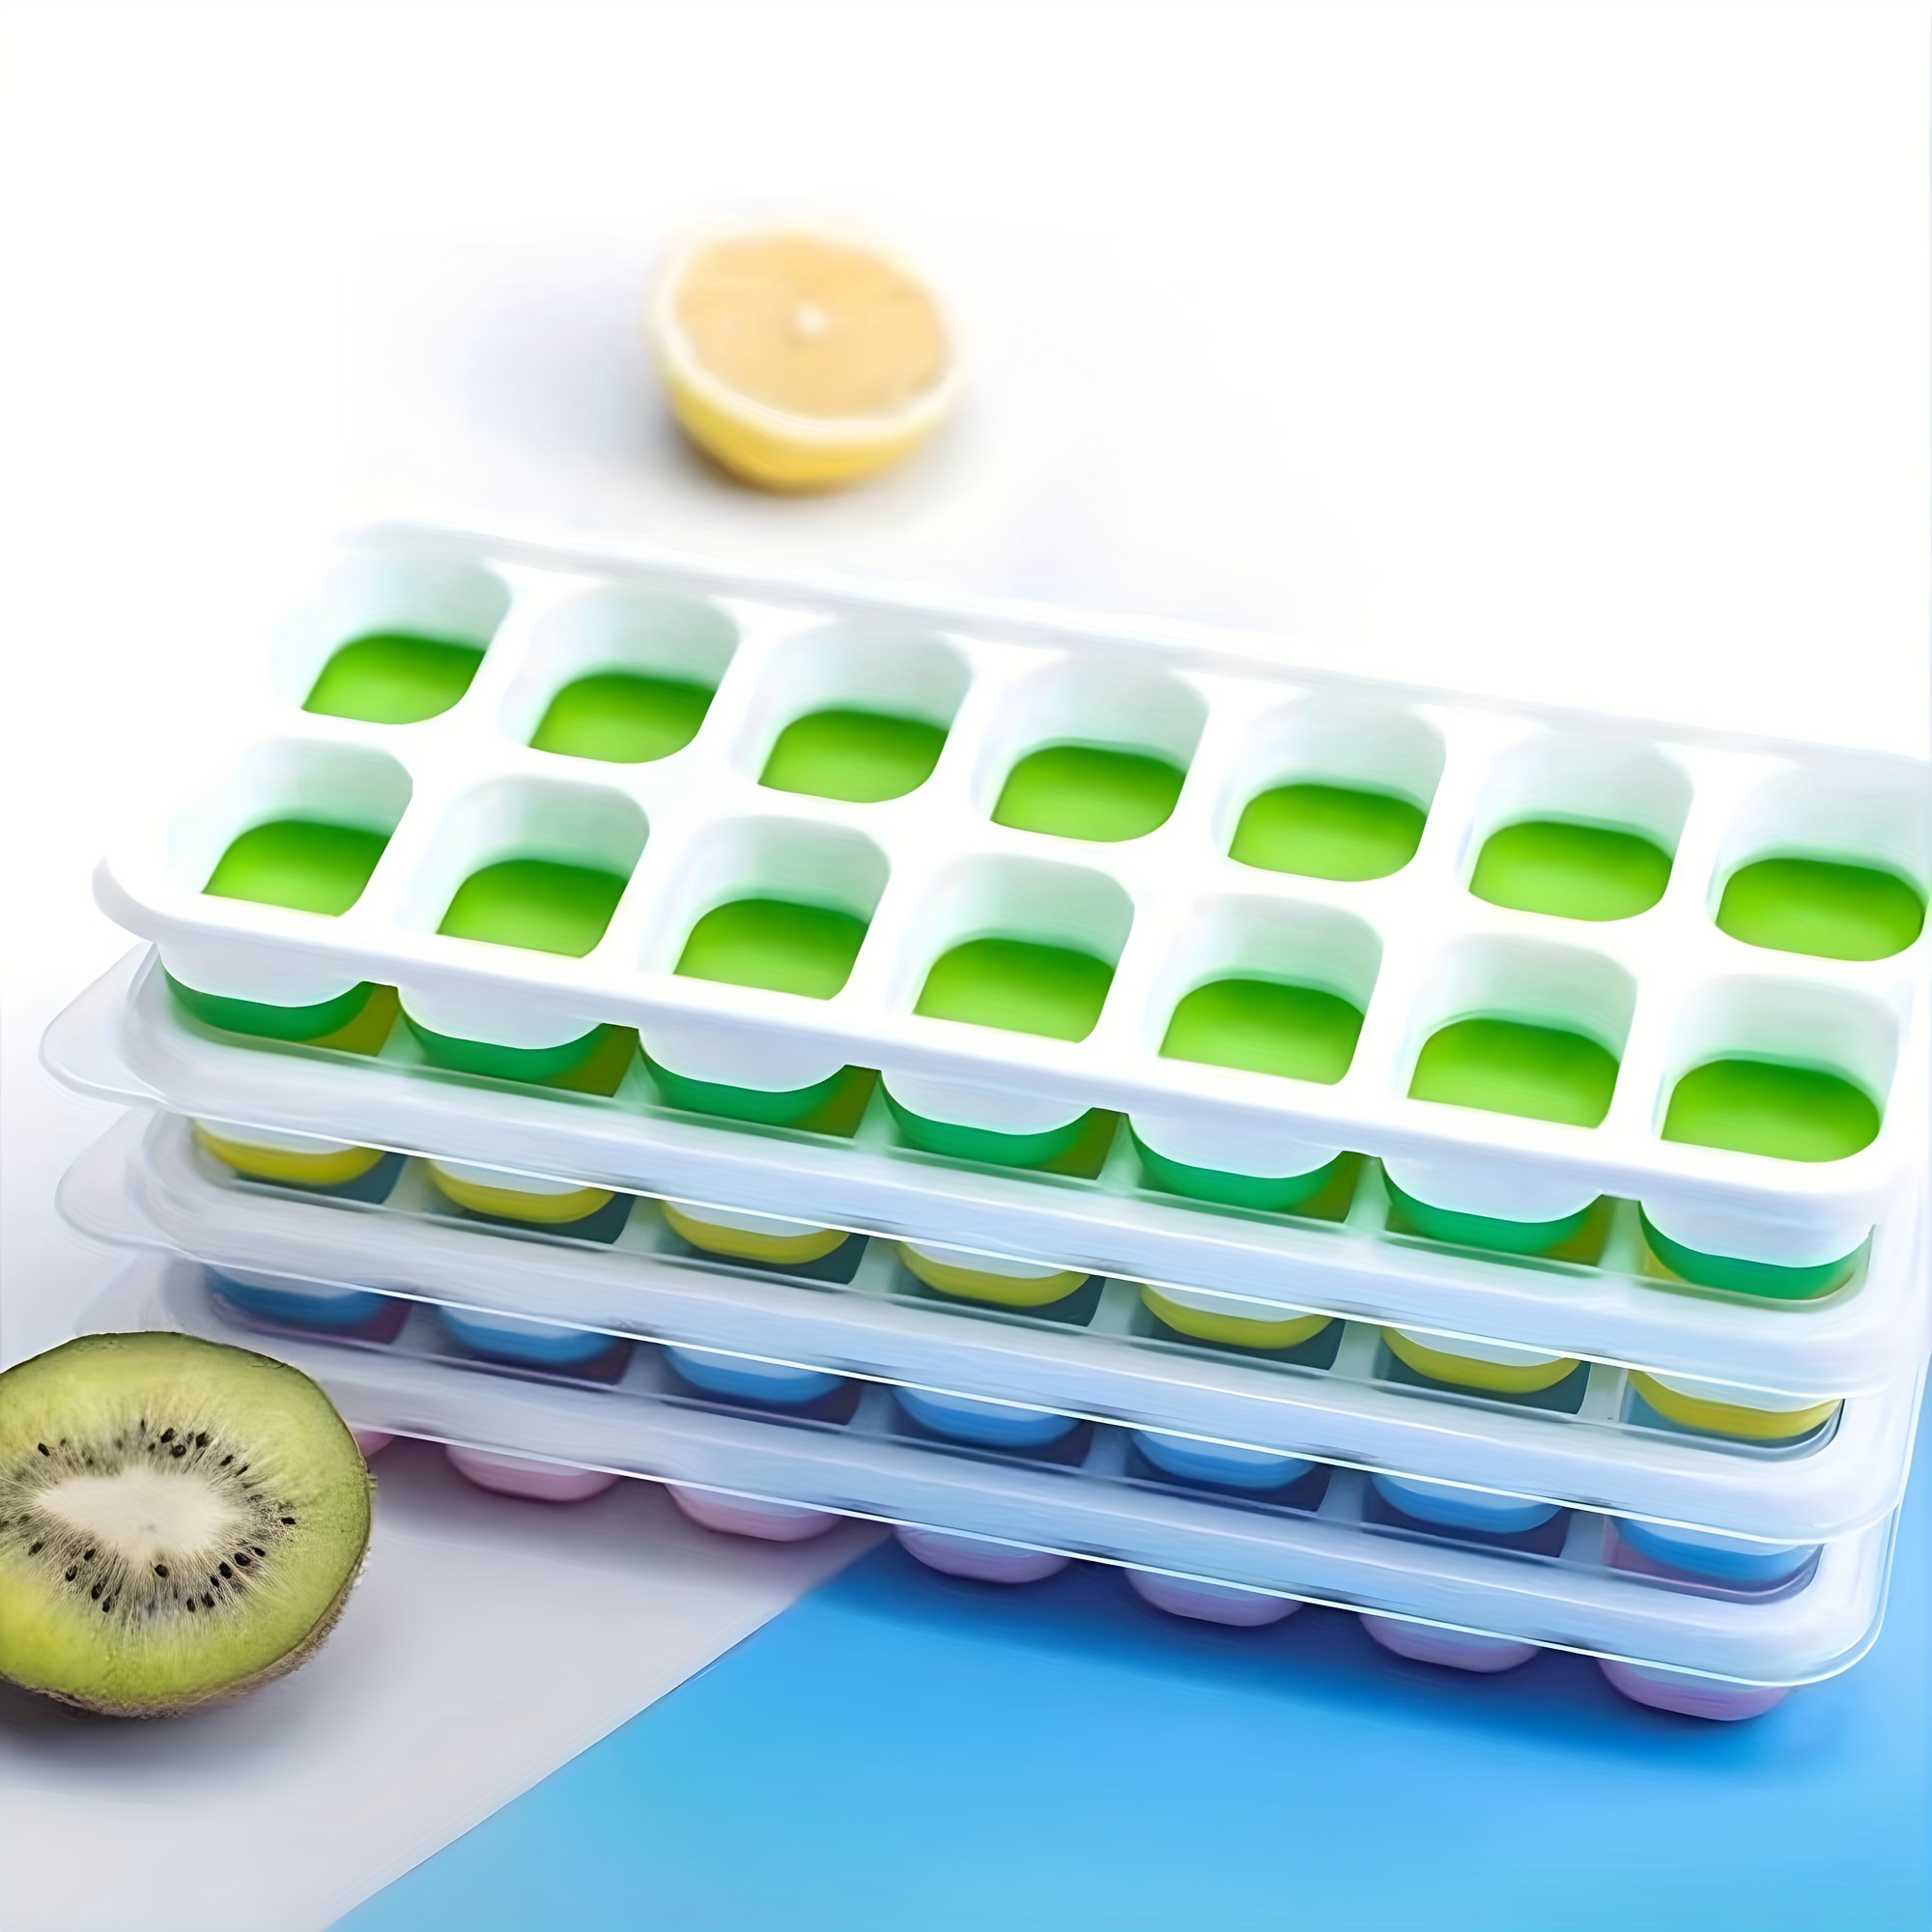 160 Grids Mini Ice Cube Mold Reusable Silicone Ice Cube Mold For DIY Making Small  Square Frozen Ice Cubes Bar Kitchen Tool - AliExpress